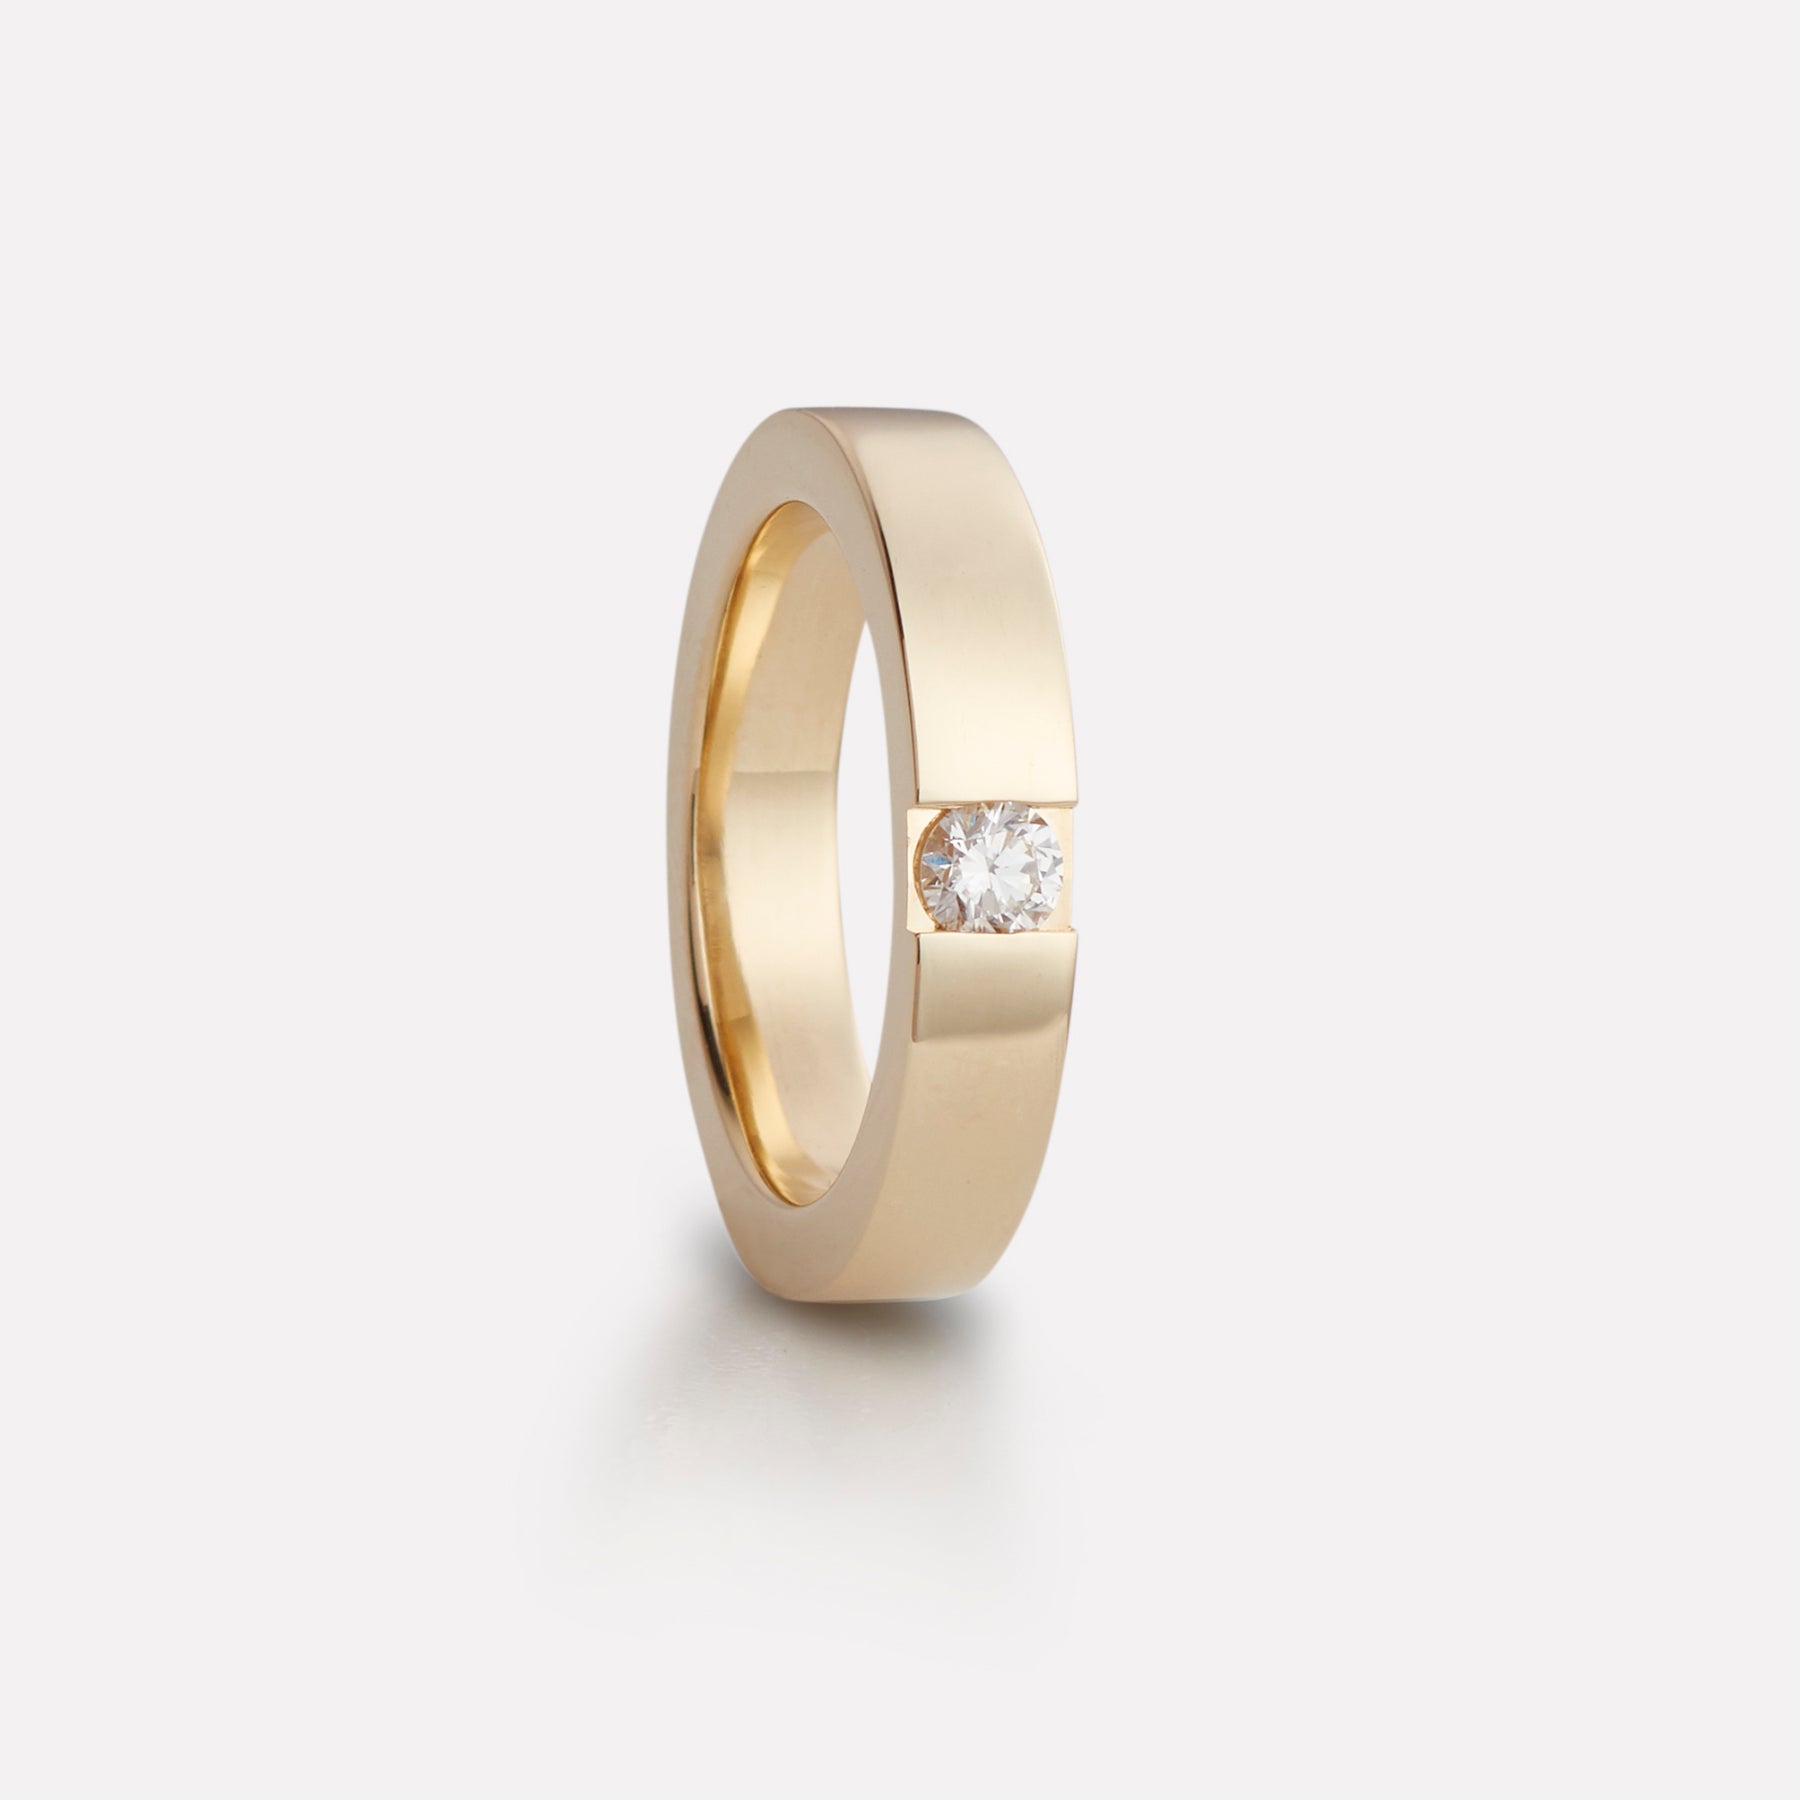 Stas ring in yellow gold with diamond, ladies